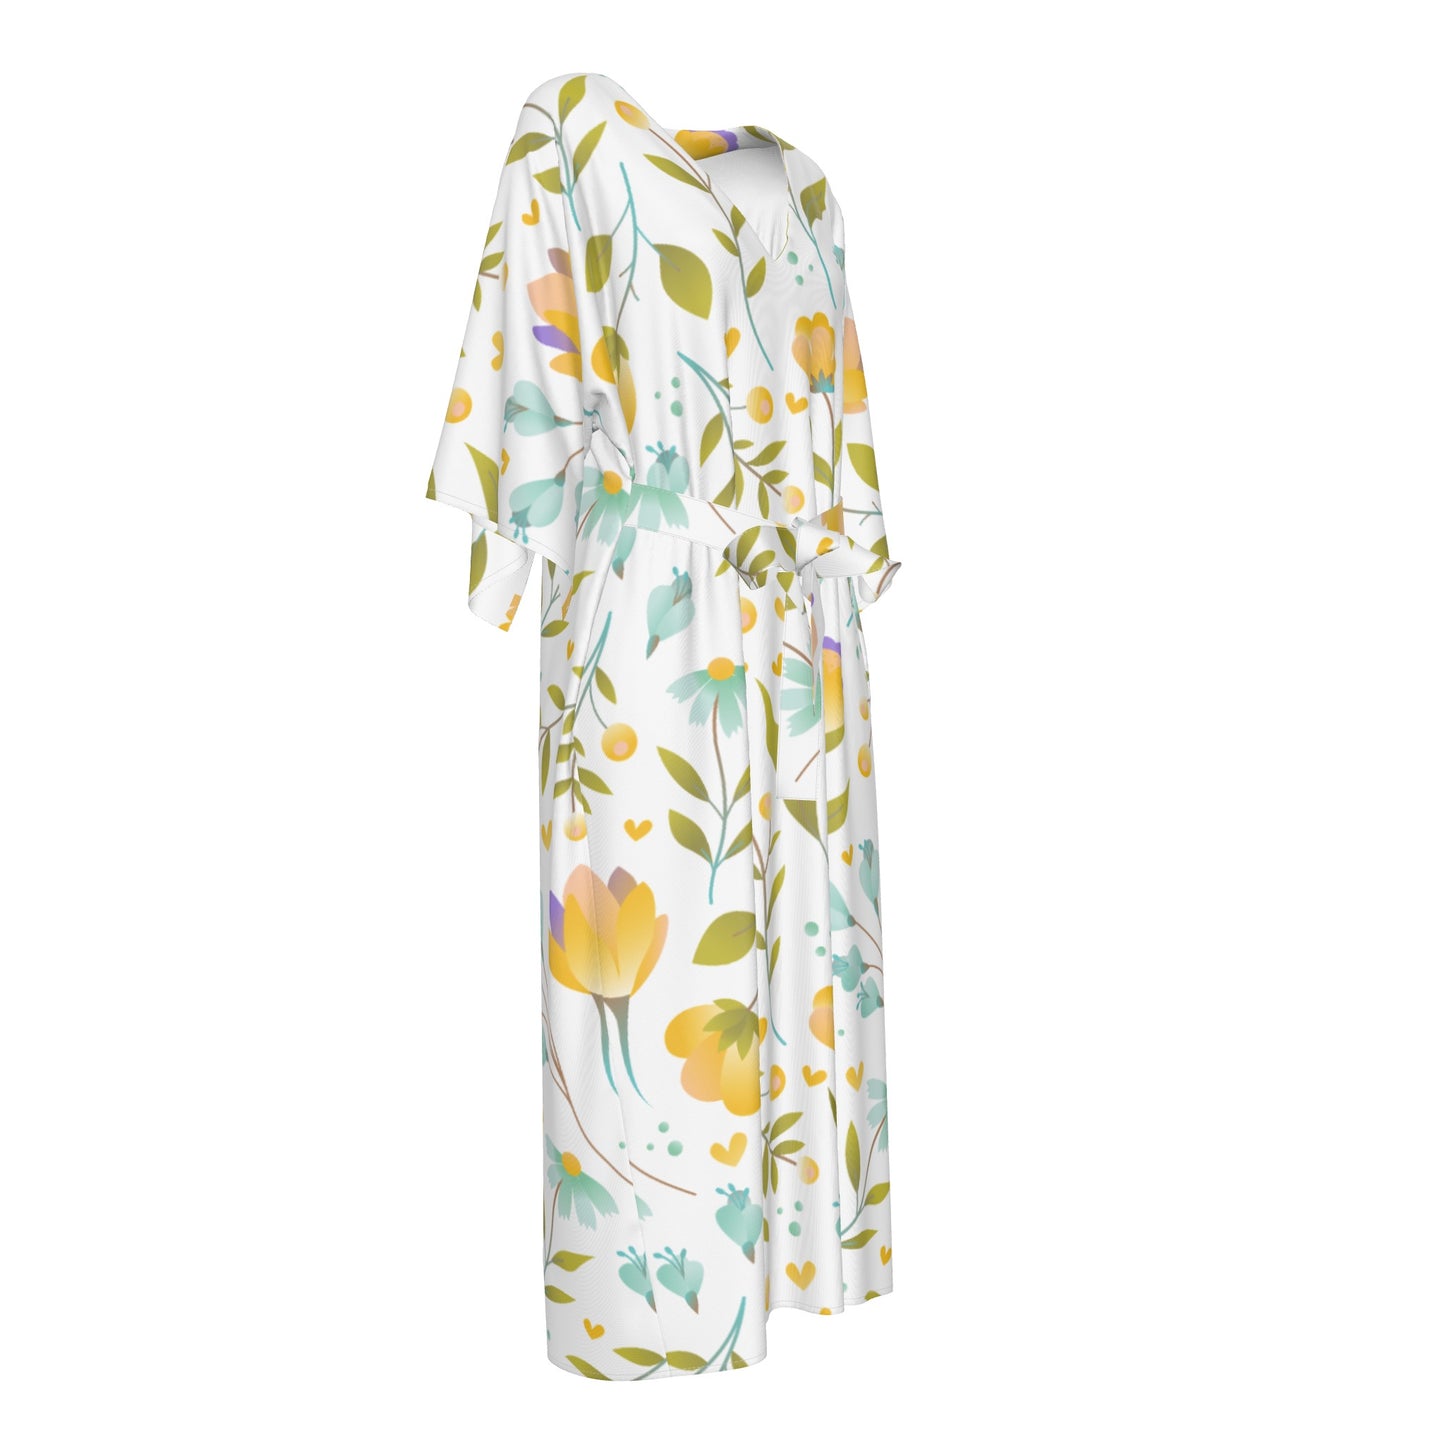 Women's mid calf dress - Yellow and blue flowers